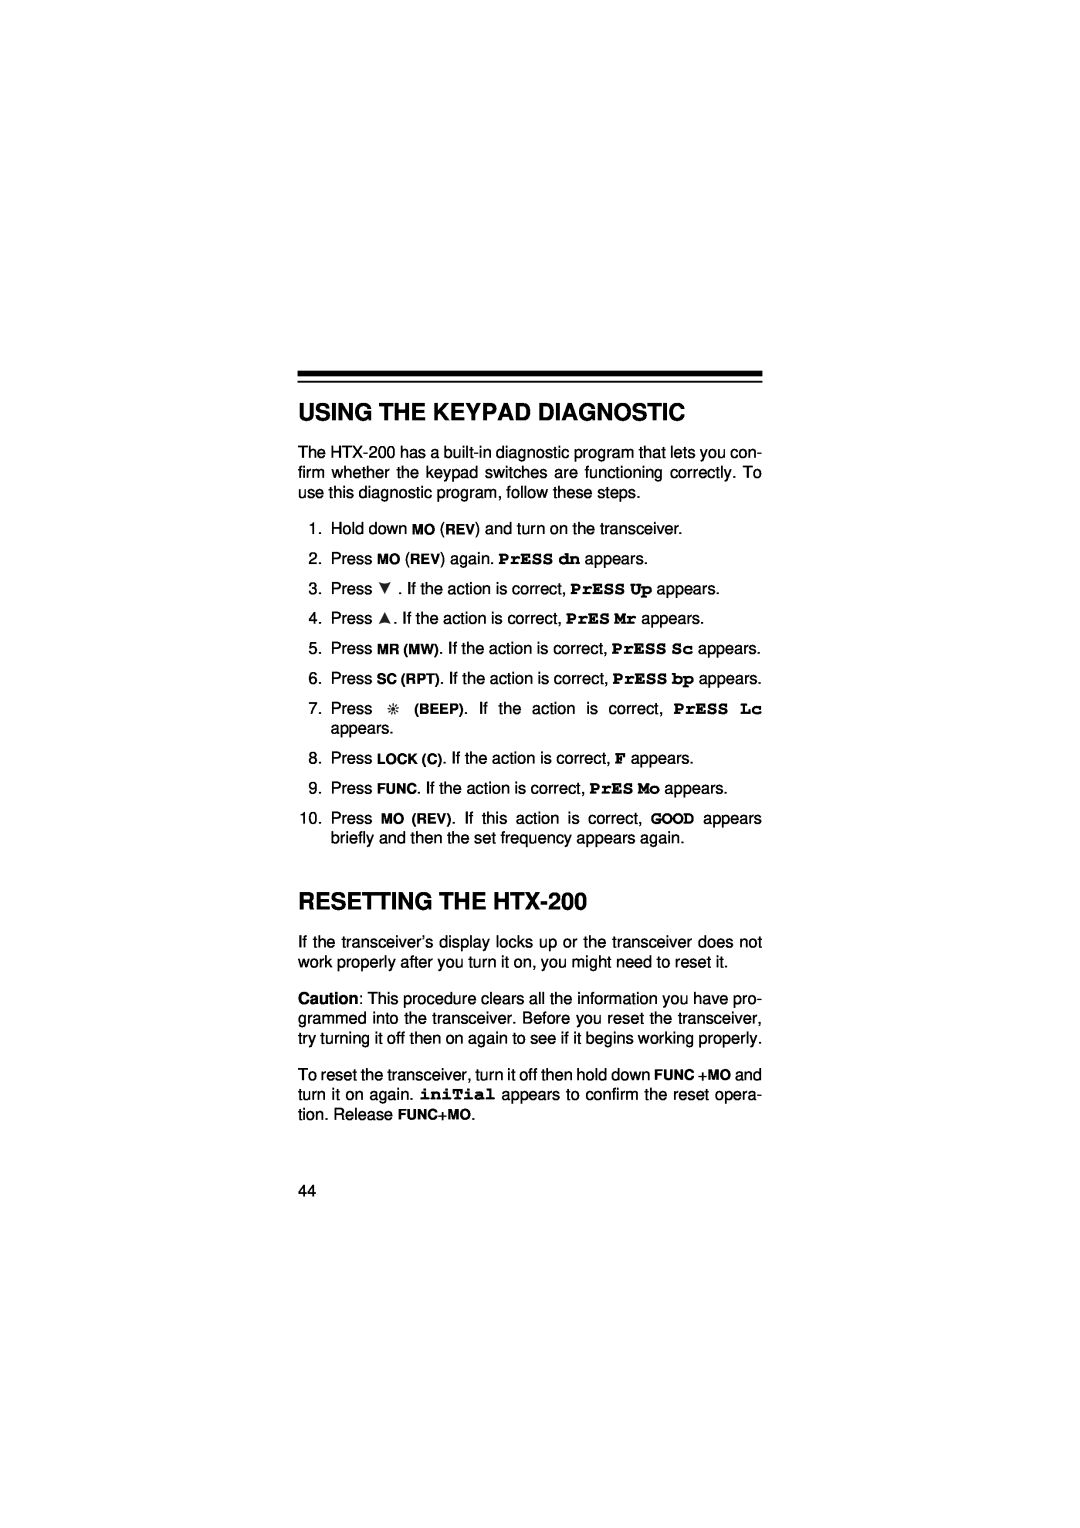 Radio Shack owner manual Using The Keypad Diagnostic, RESETTING THE HTX-200 